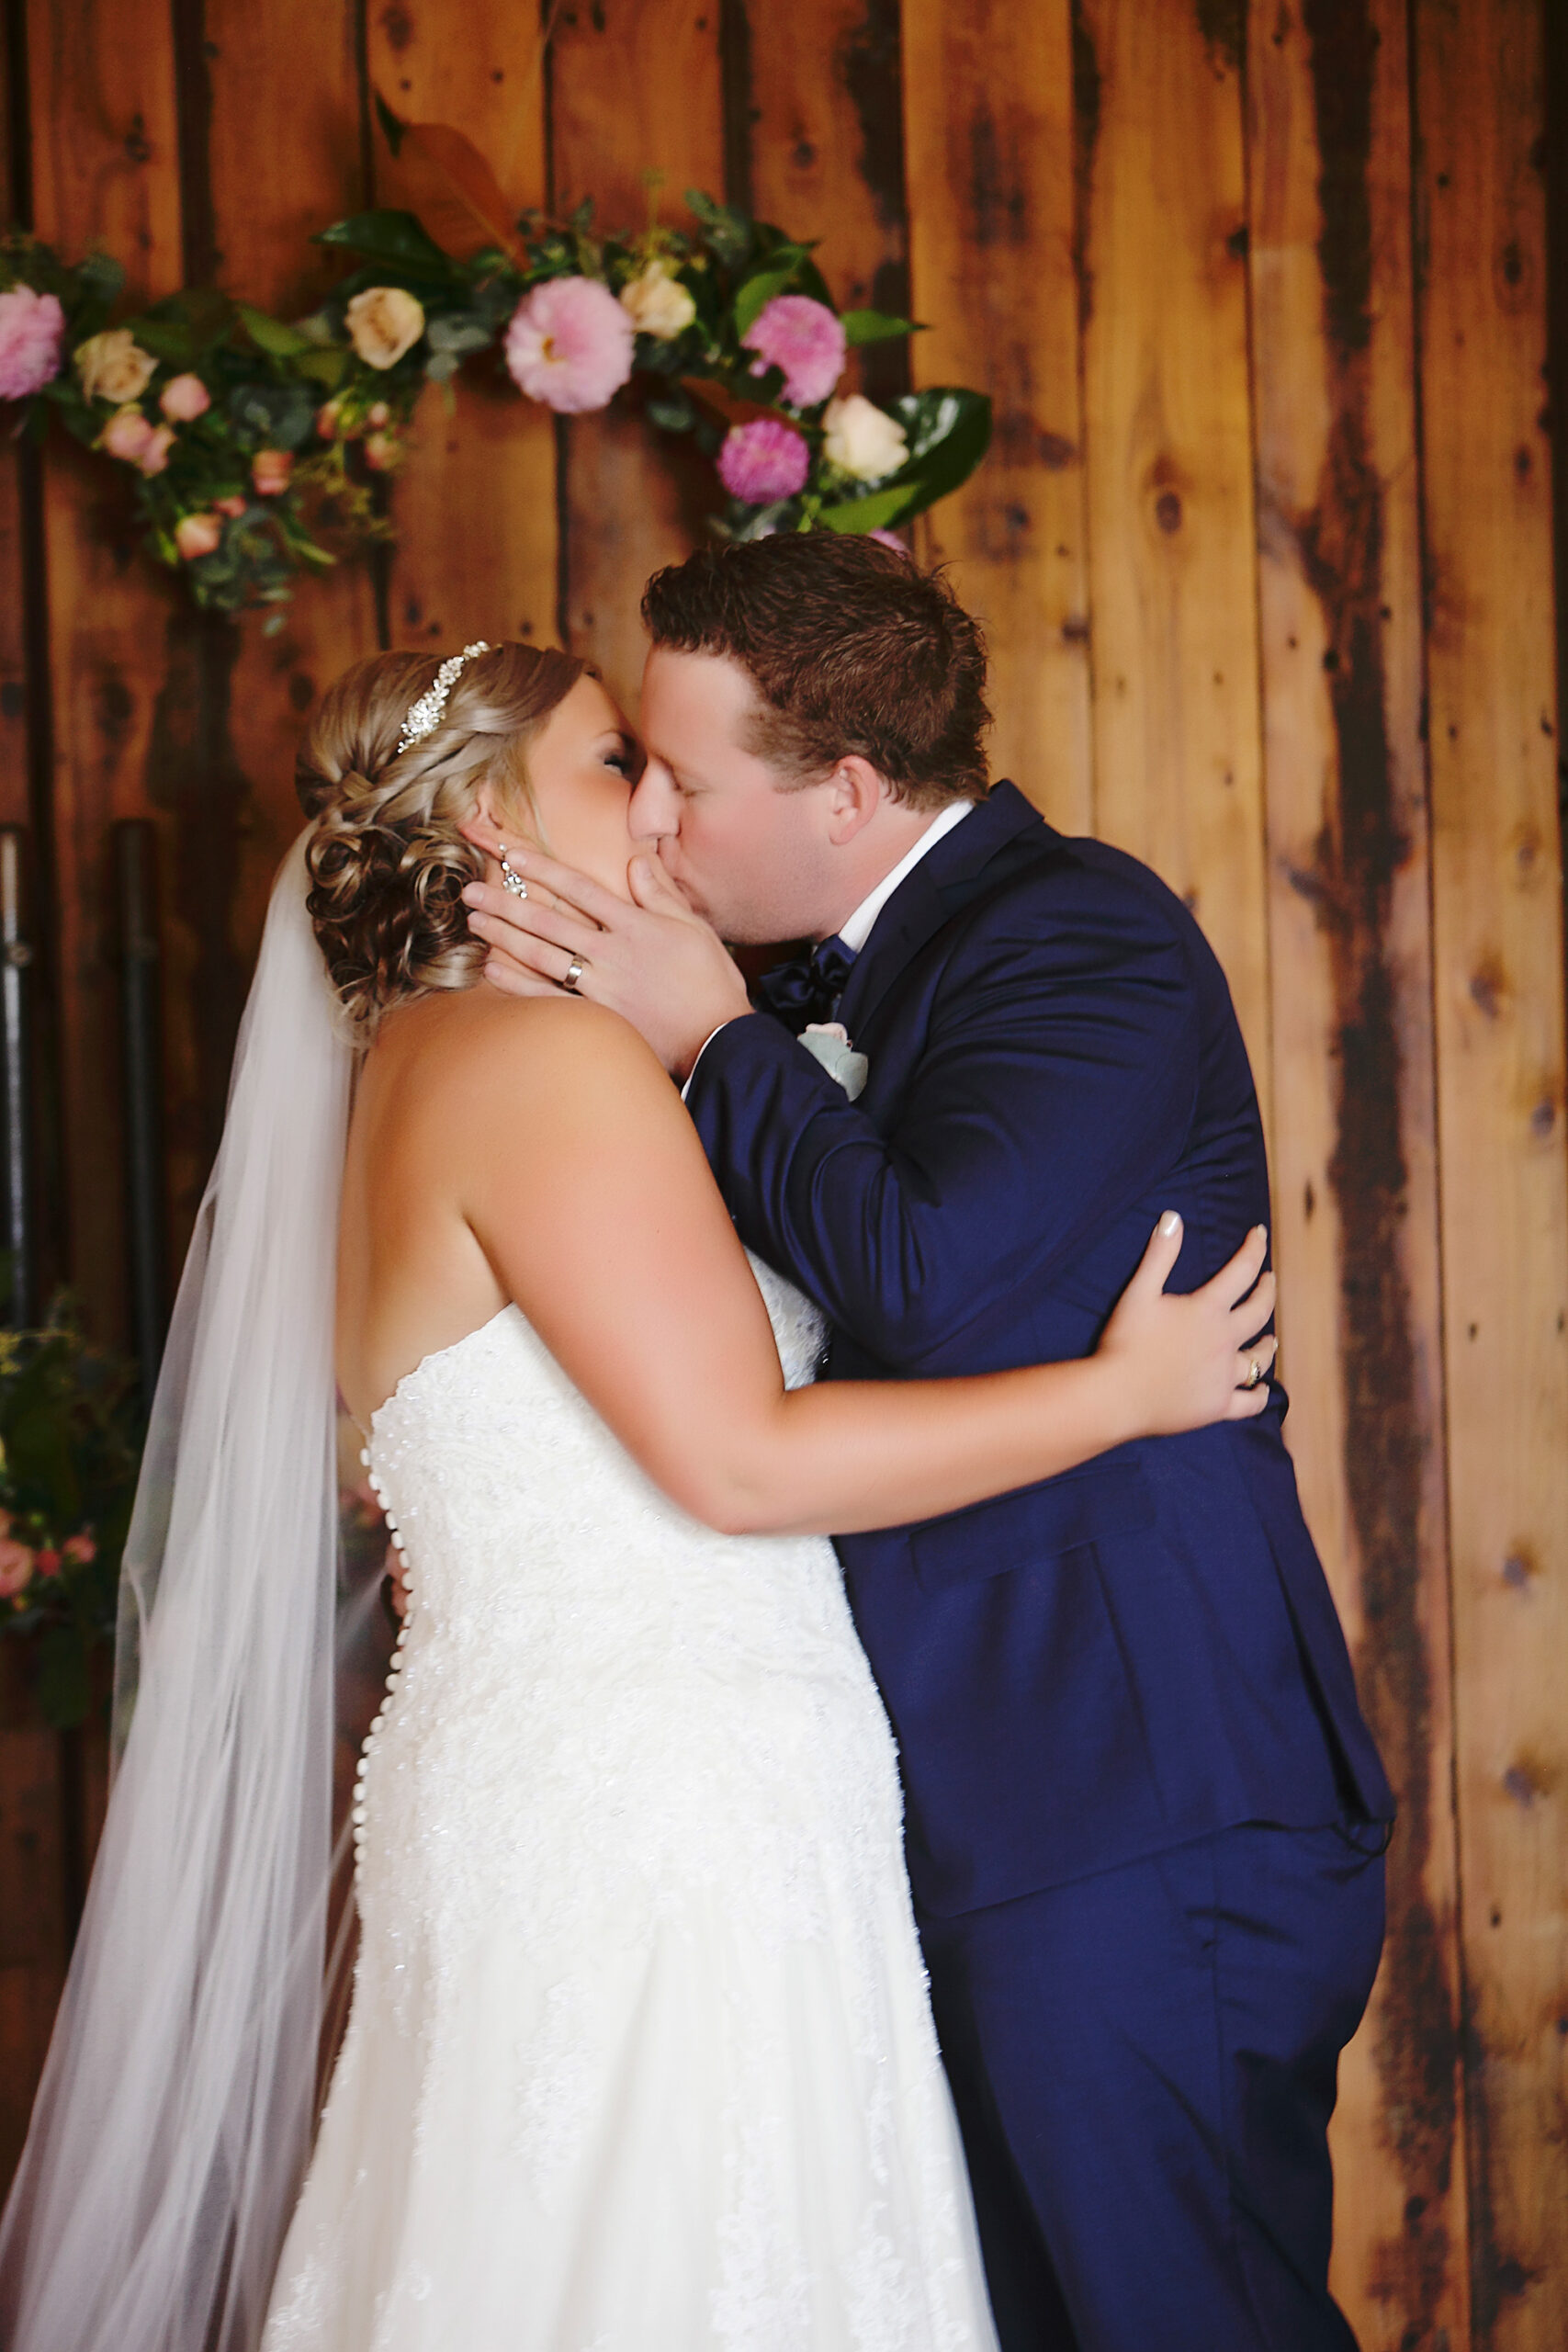 Jayne_Damian_Classic-Country-Wedding_Leanne-Whitley-Photography_039